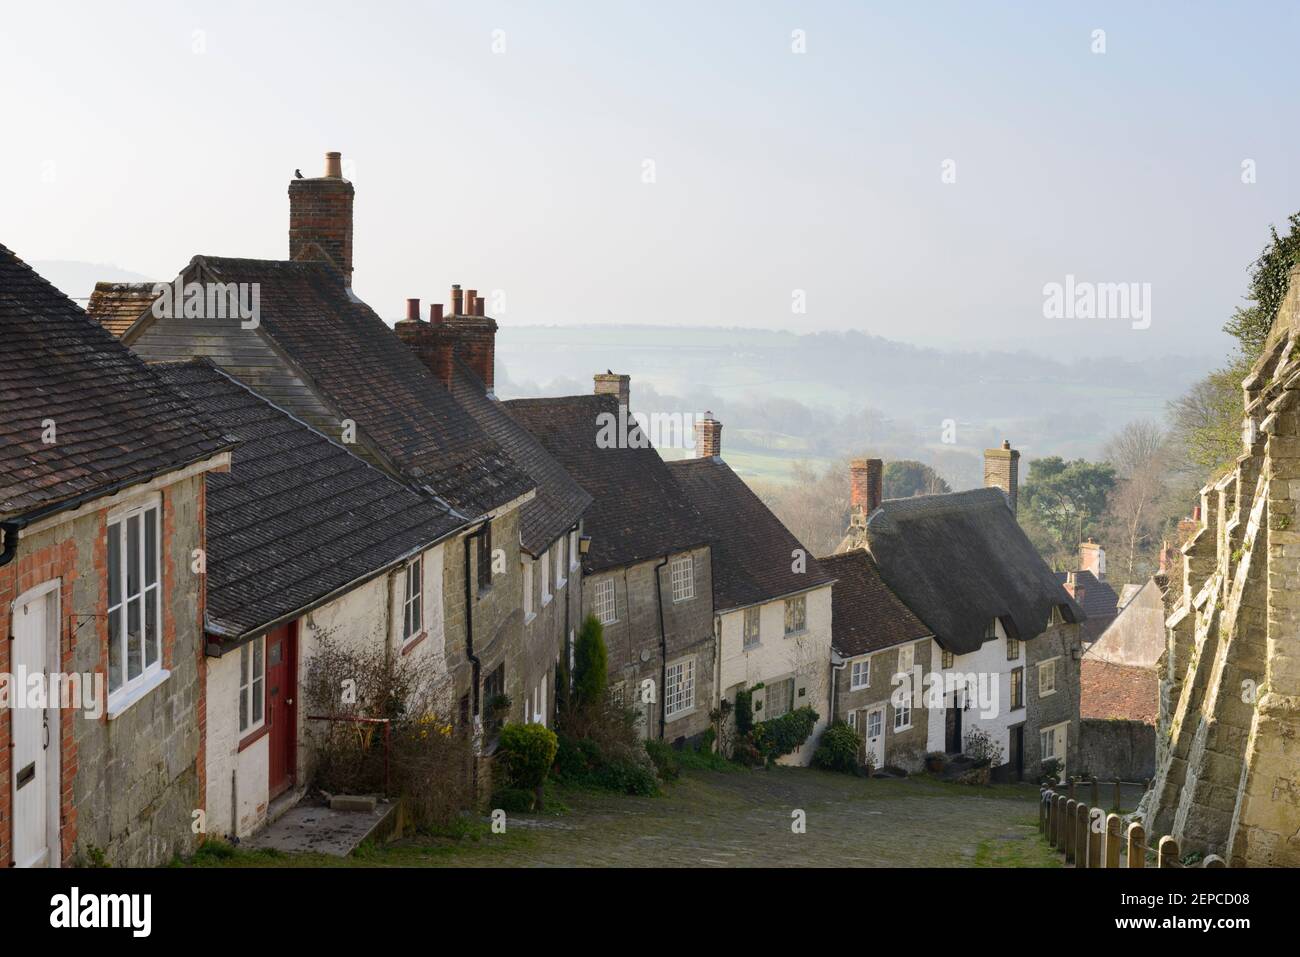 Cottages on the steep slope of Gold Hill, Shaftesbury, Dorset, UK. Stock Photo